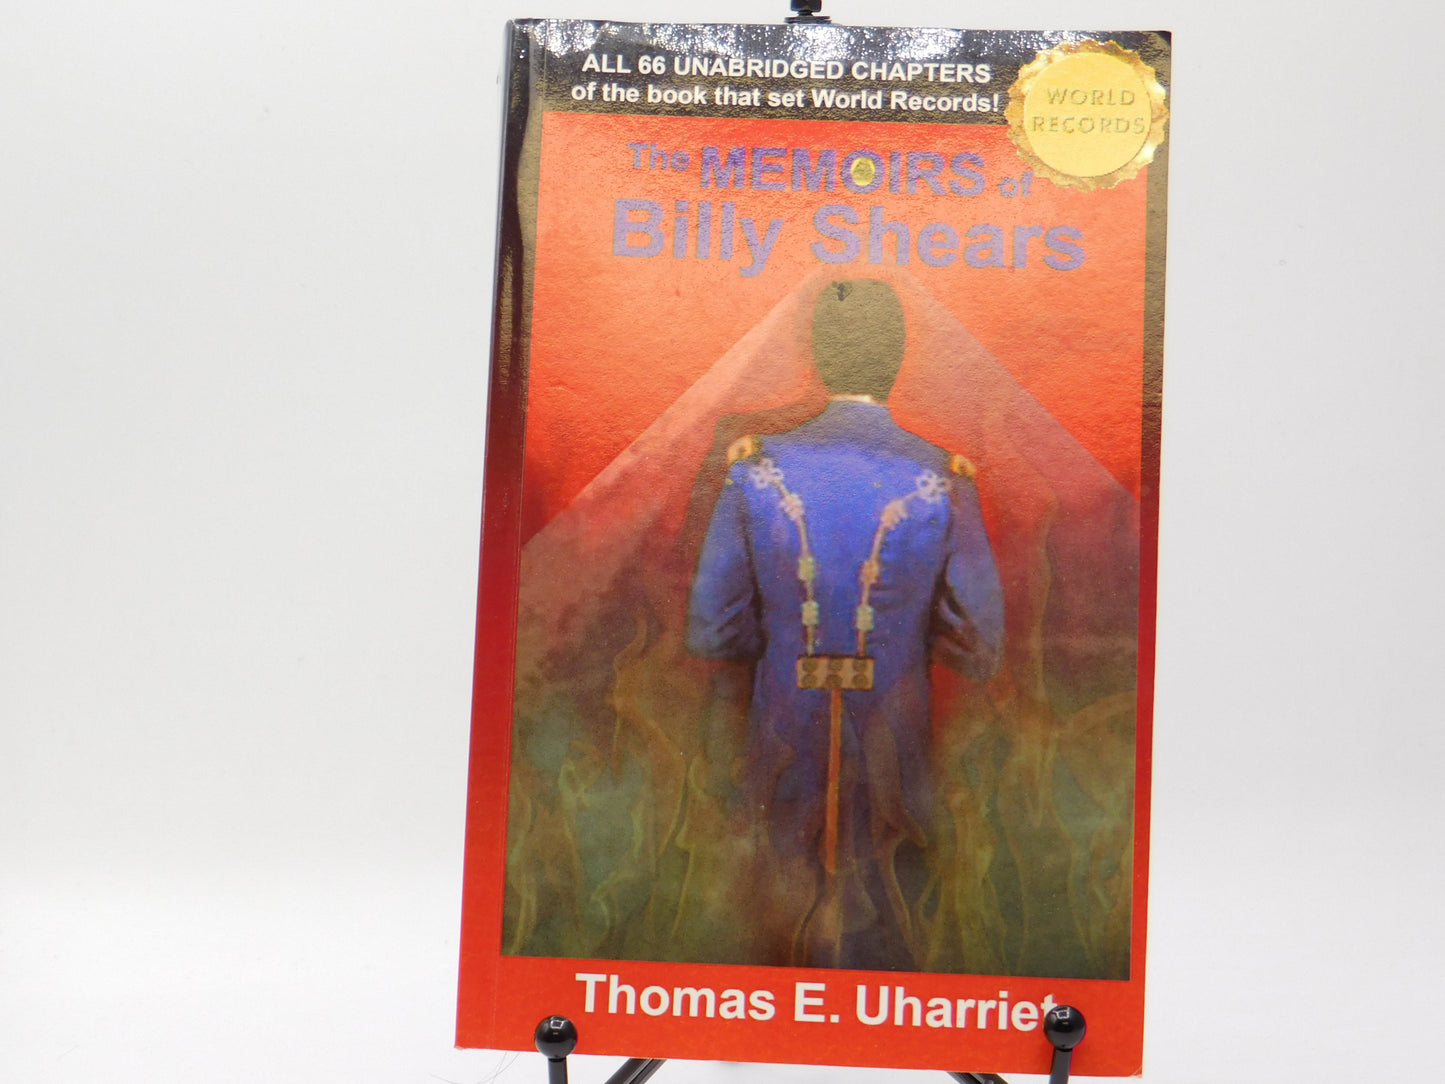 The Memoirs of Billy Shears by Thomas Uharriet